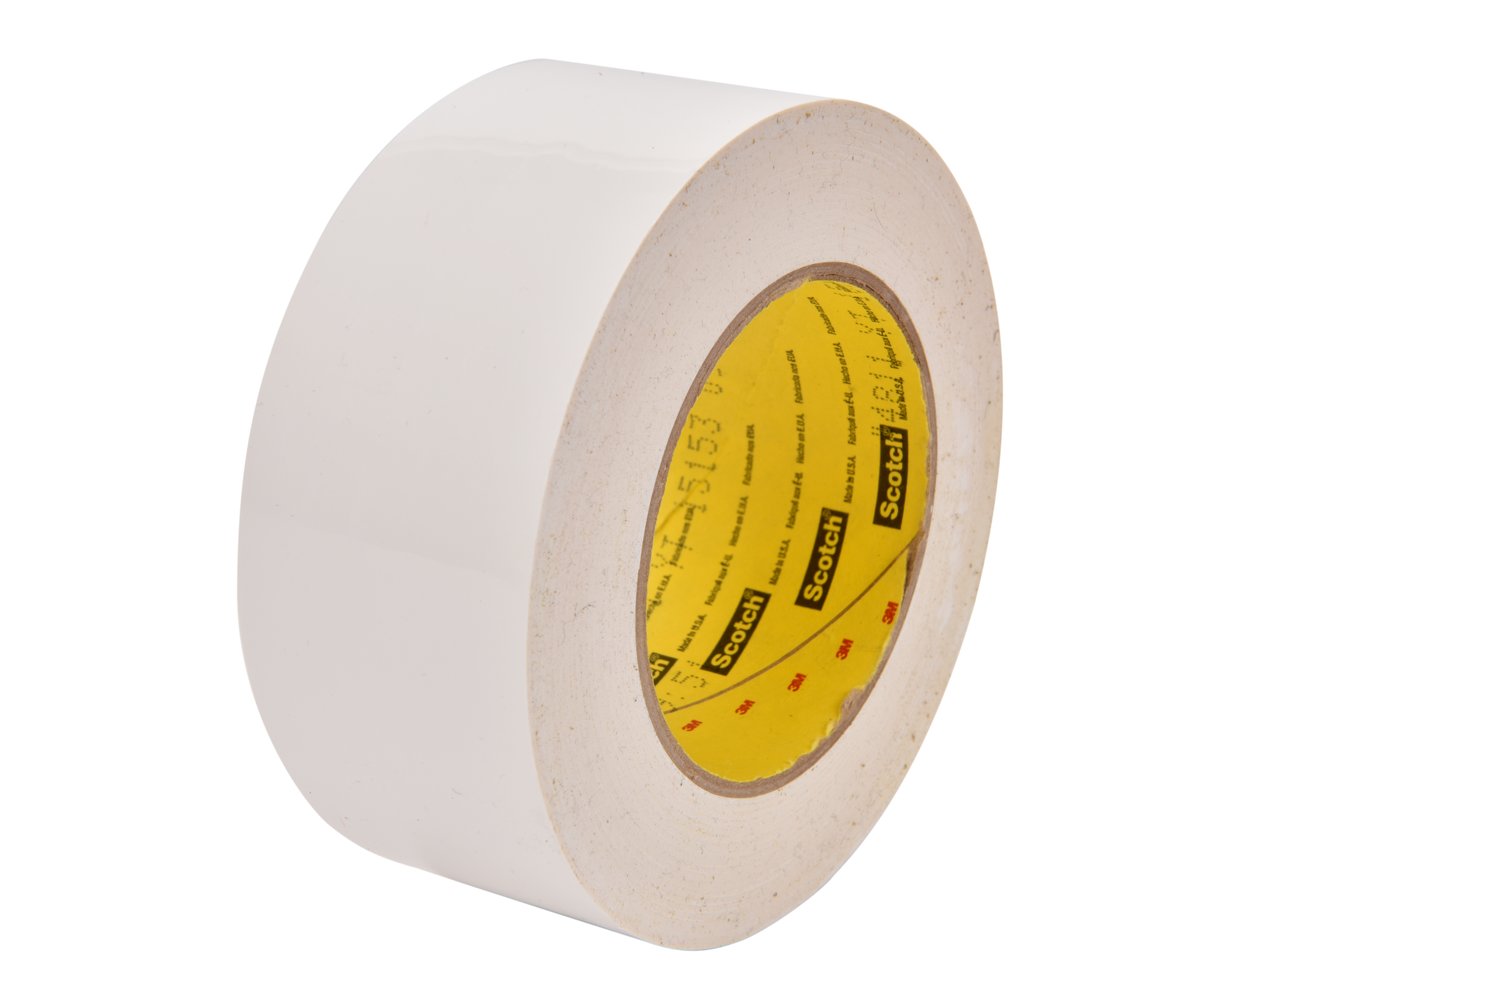 7010334077 - 3M Preservation Sealing Tape 4811, White, 3 in x 36 yd, 9.5 mil, 12
rolls per case